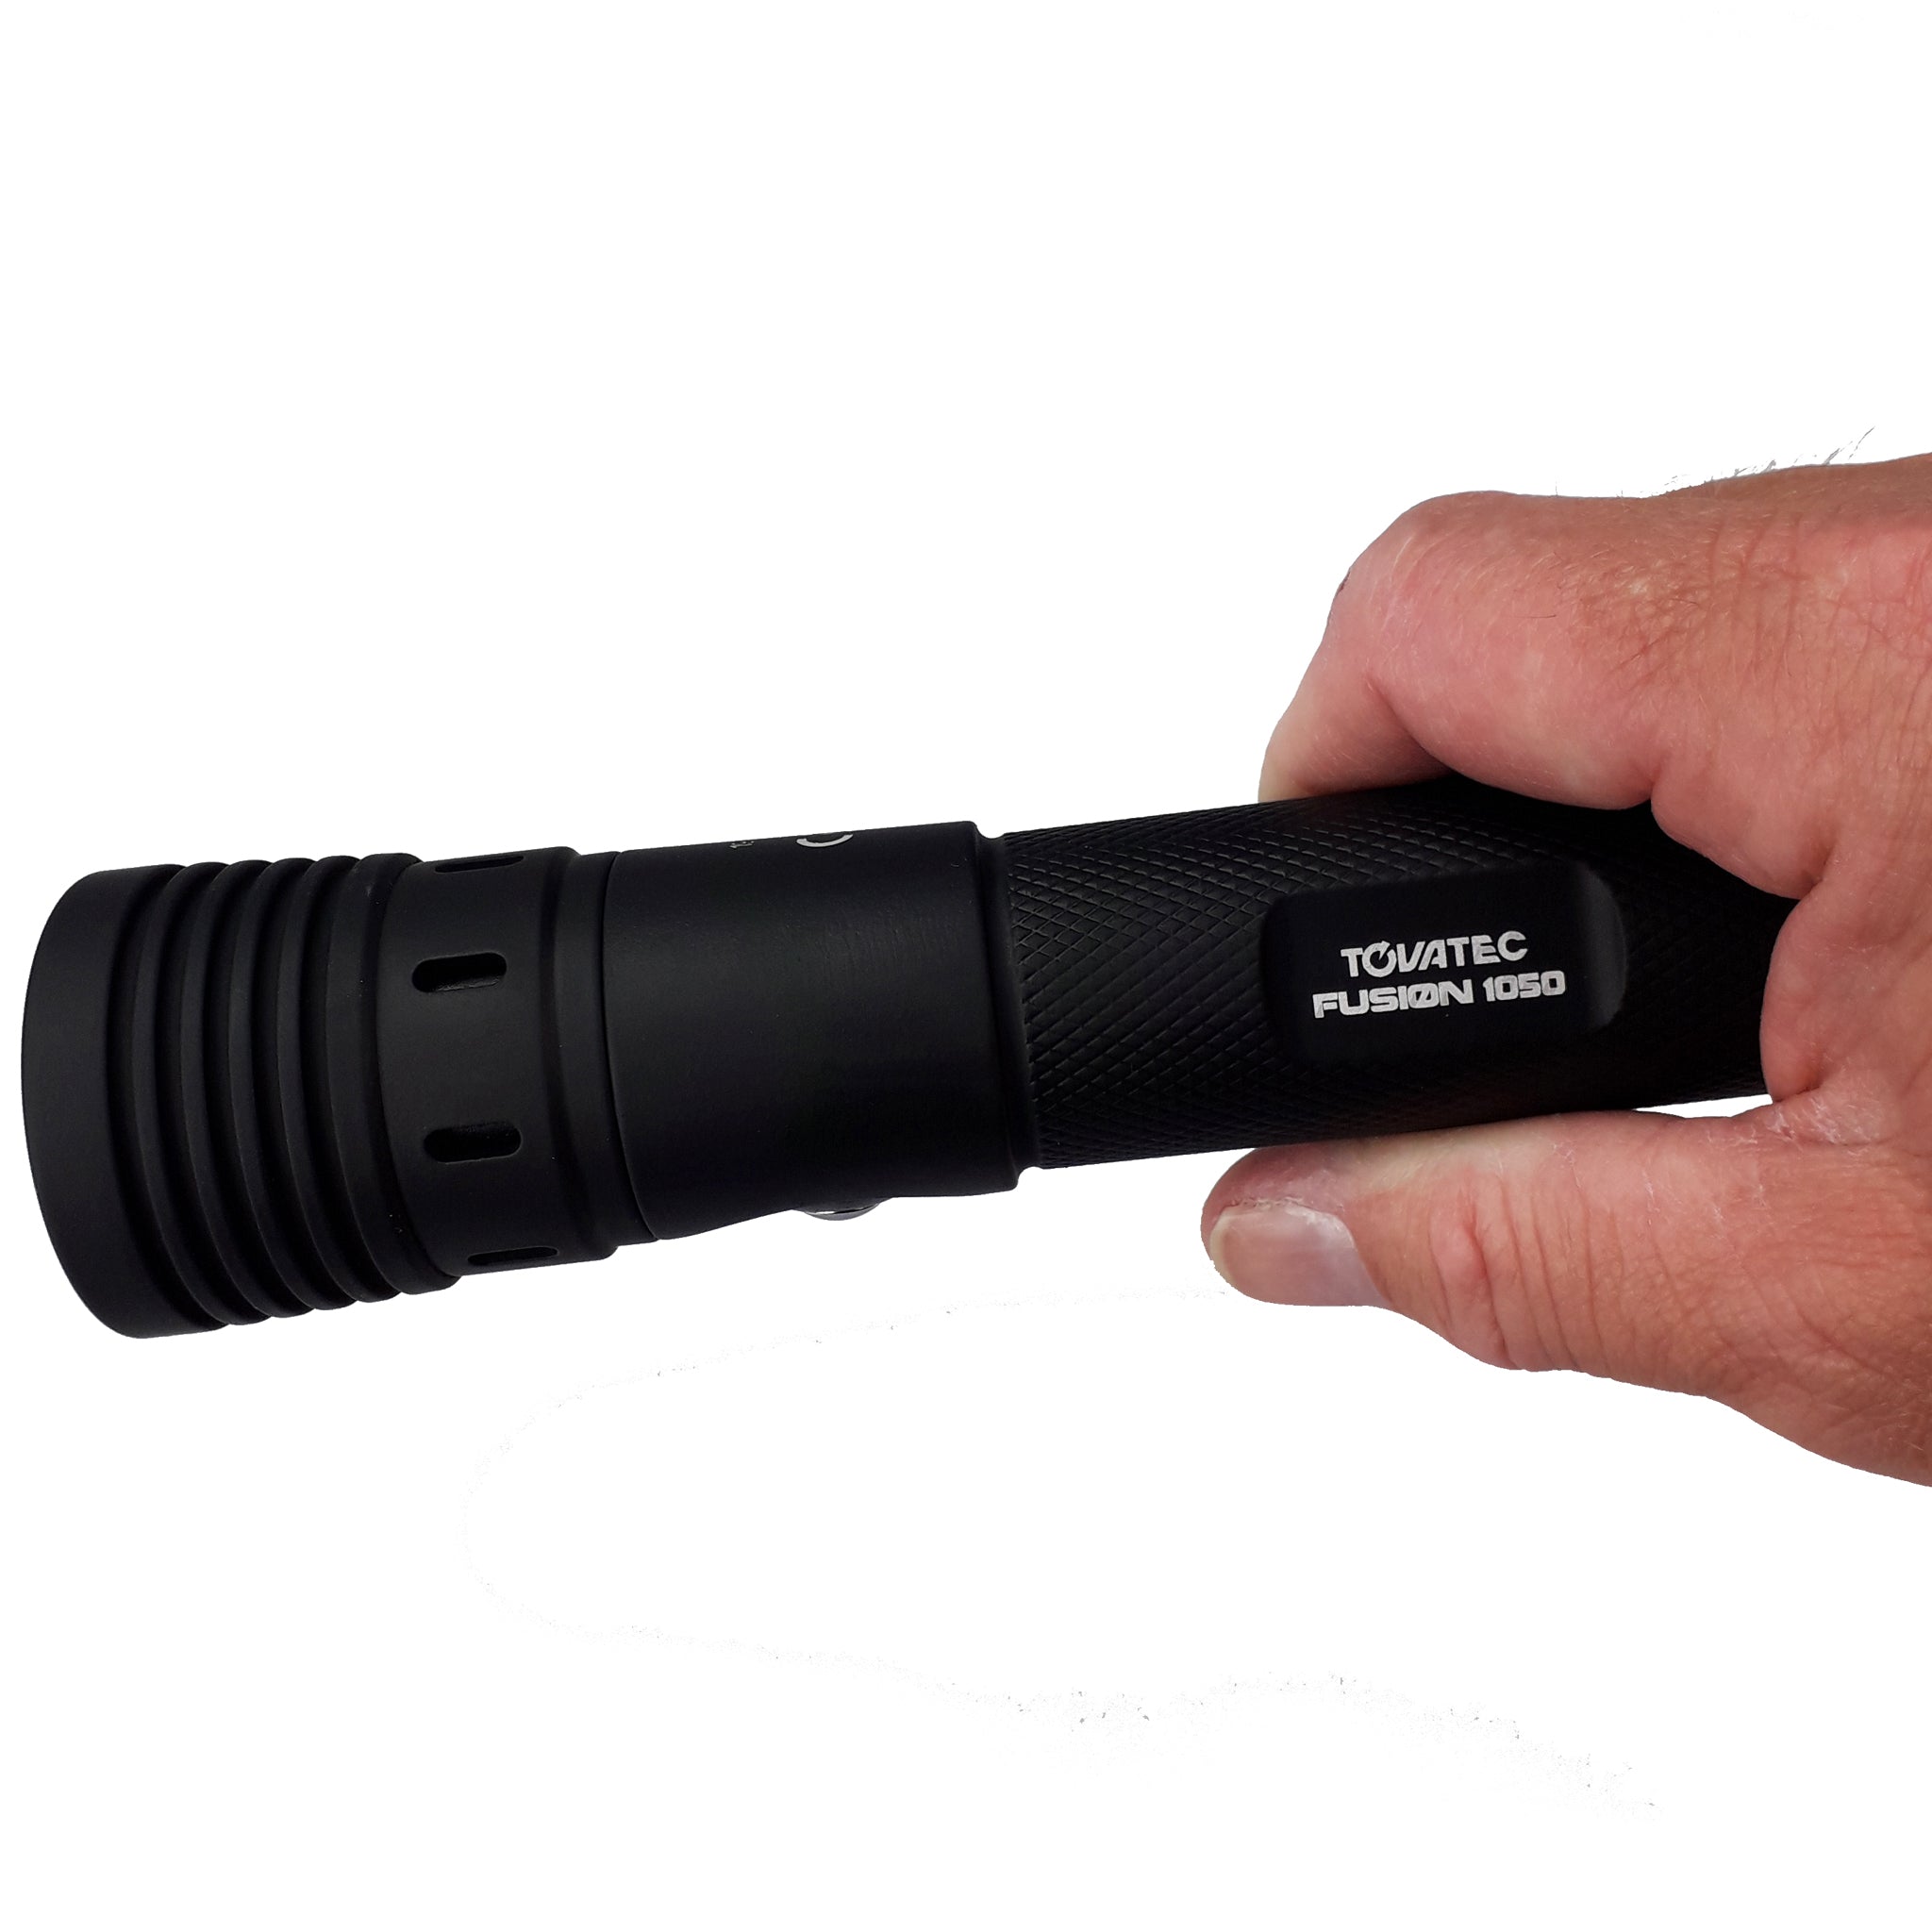 Tovatec Fusion 1050 Dive Torch Compact and Lightweight